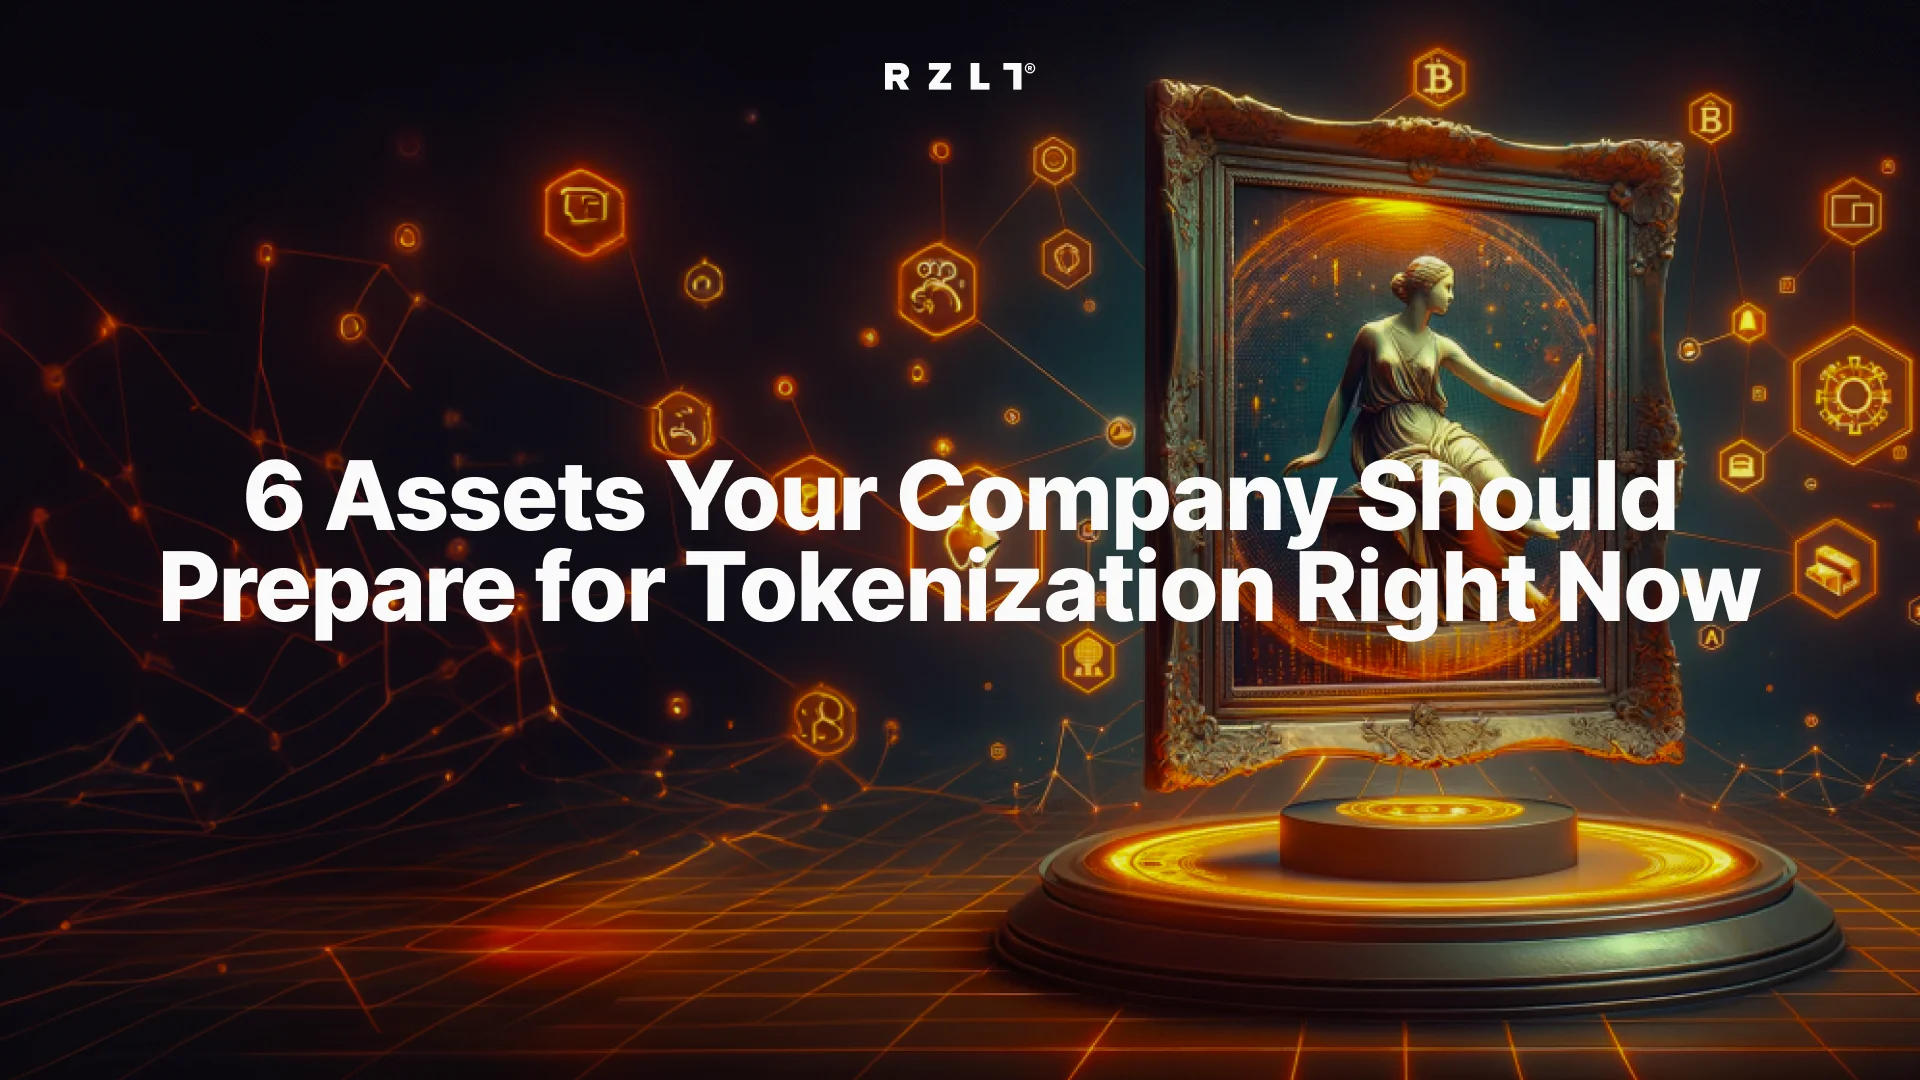 6 Assets Your Company Should Prepare for Tokenization Right Now